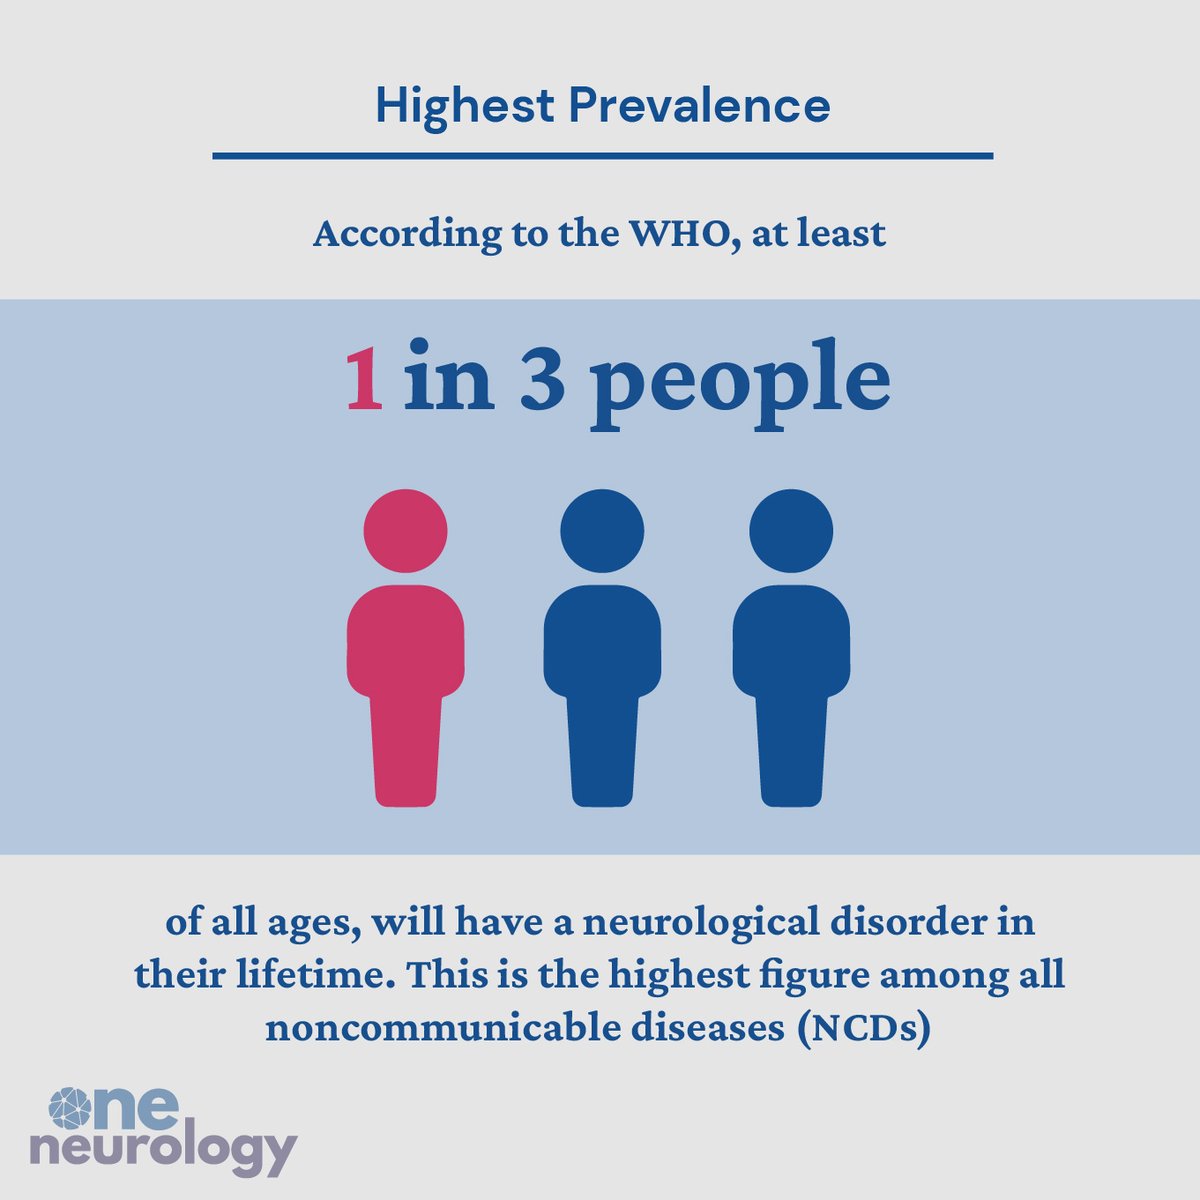 With 1/3 people affected by neurological disease in their lifetime, now is the time to act for better health outcomes! The #OneNeurology Initiative aims to unite neurology groups in collaborative advocacy for the prevention & treatment of these disorders worldwide. #WorldBrainDay